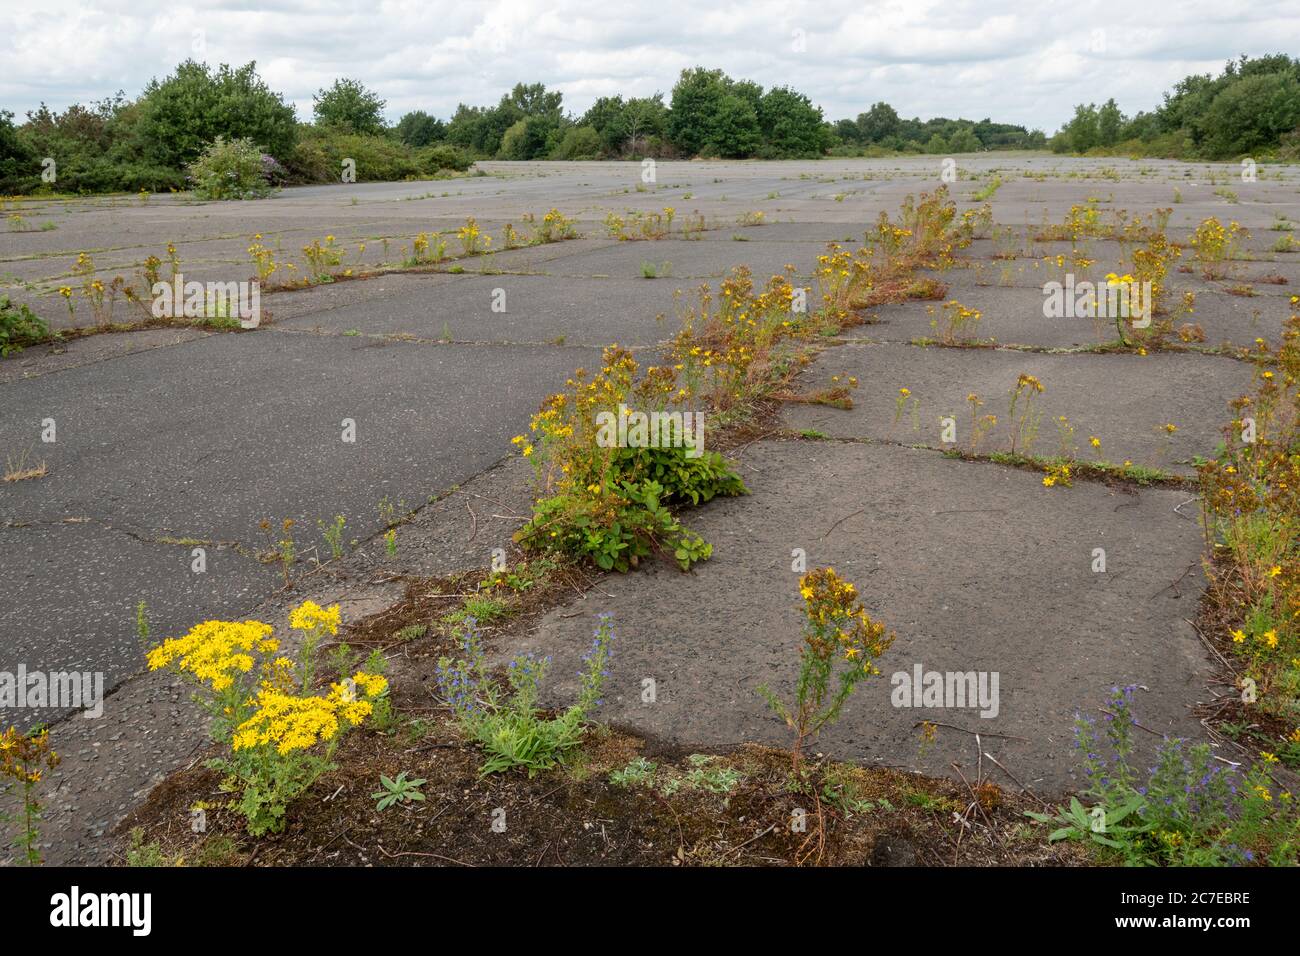 Wildflowers returning to a brownfield site, a disused runway at Blackbushe Airport, Hampshire, UK. Rewilding concept Stock Photo